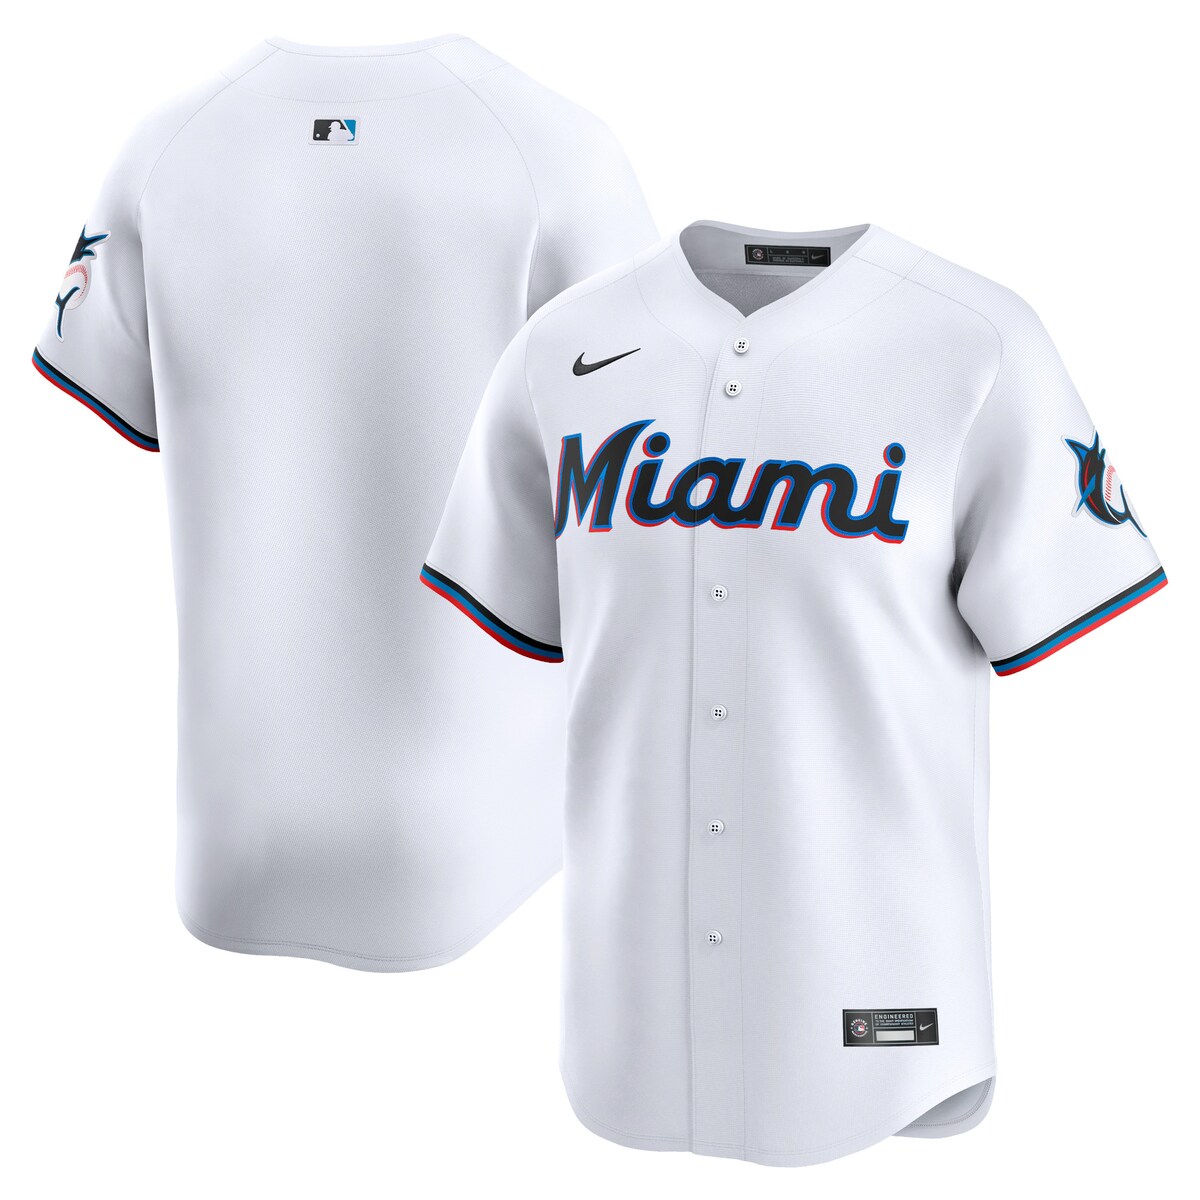 MLB }[Y ~ebh jtH[ Nike iCL LbY zCg (2024 Nike Youth Limited Team Blank Jerseys - FTF NTP Master Style)